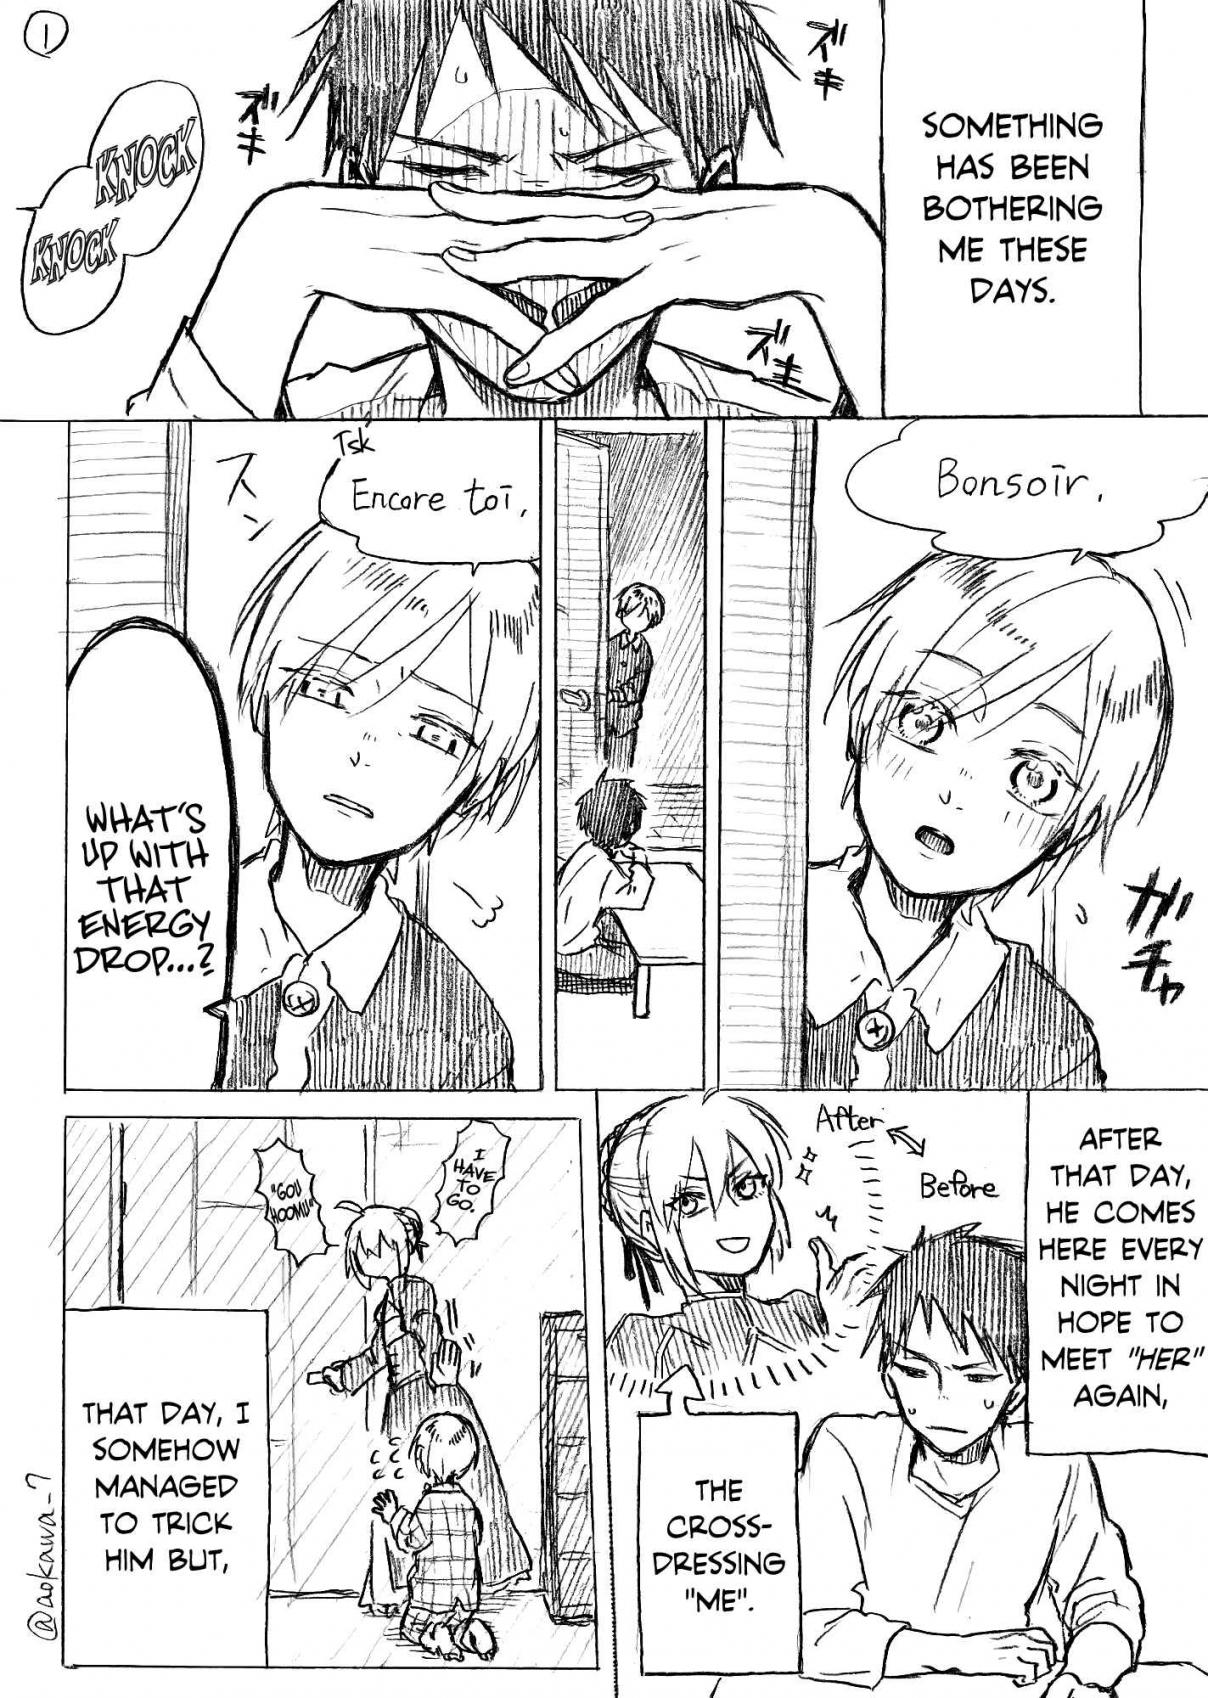 A Crossdressing Cosplayer Gets a Brother Ch. 1.2 Part 2